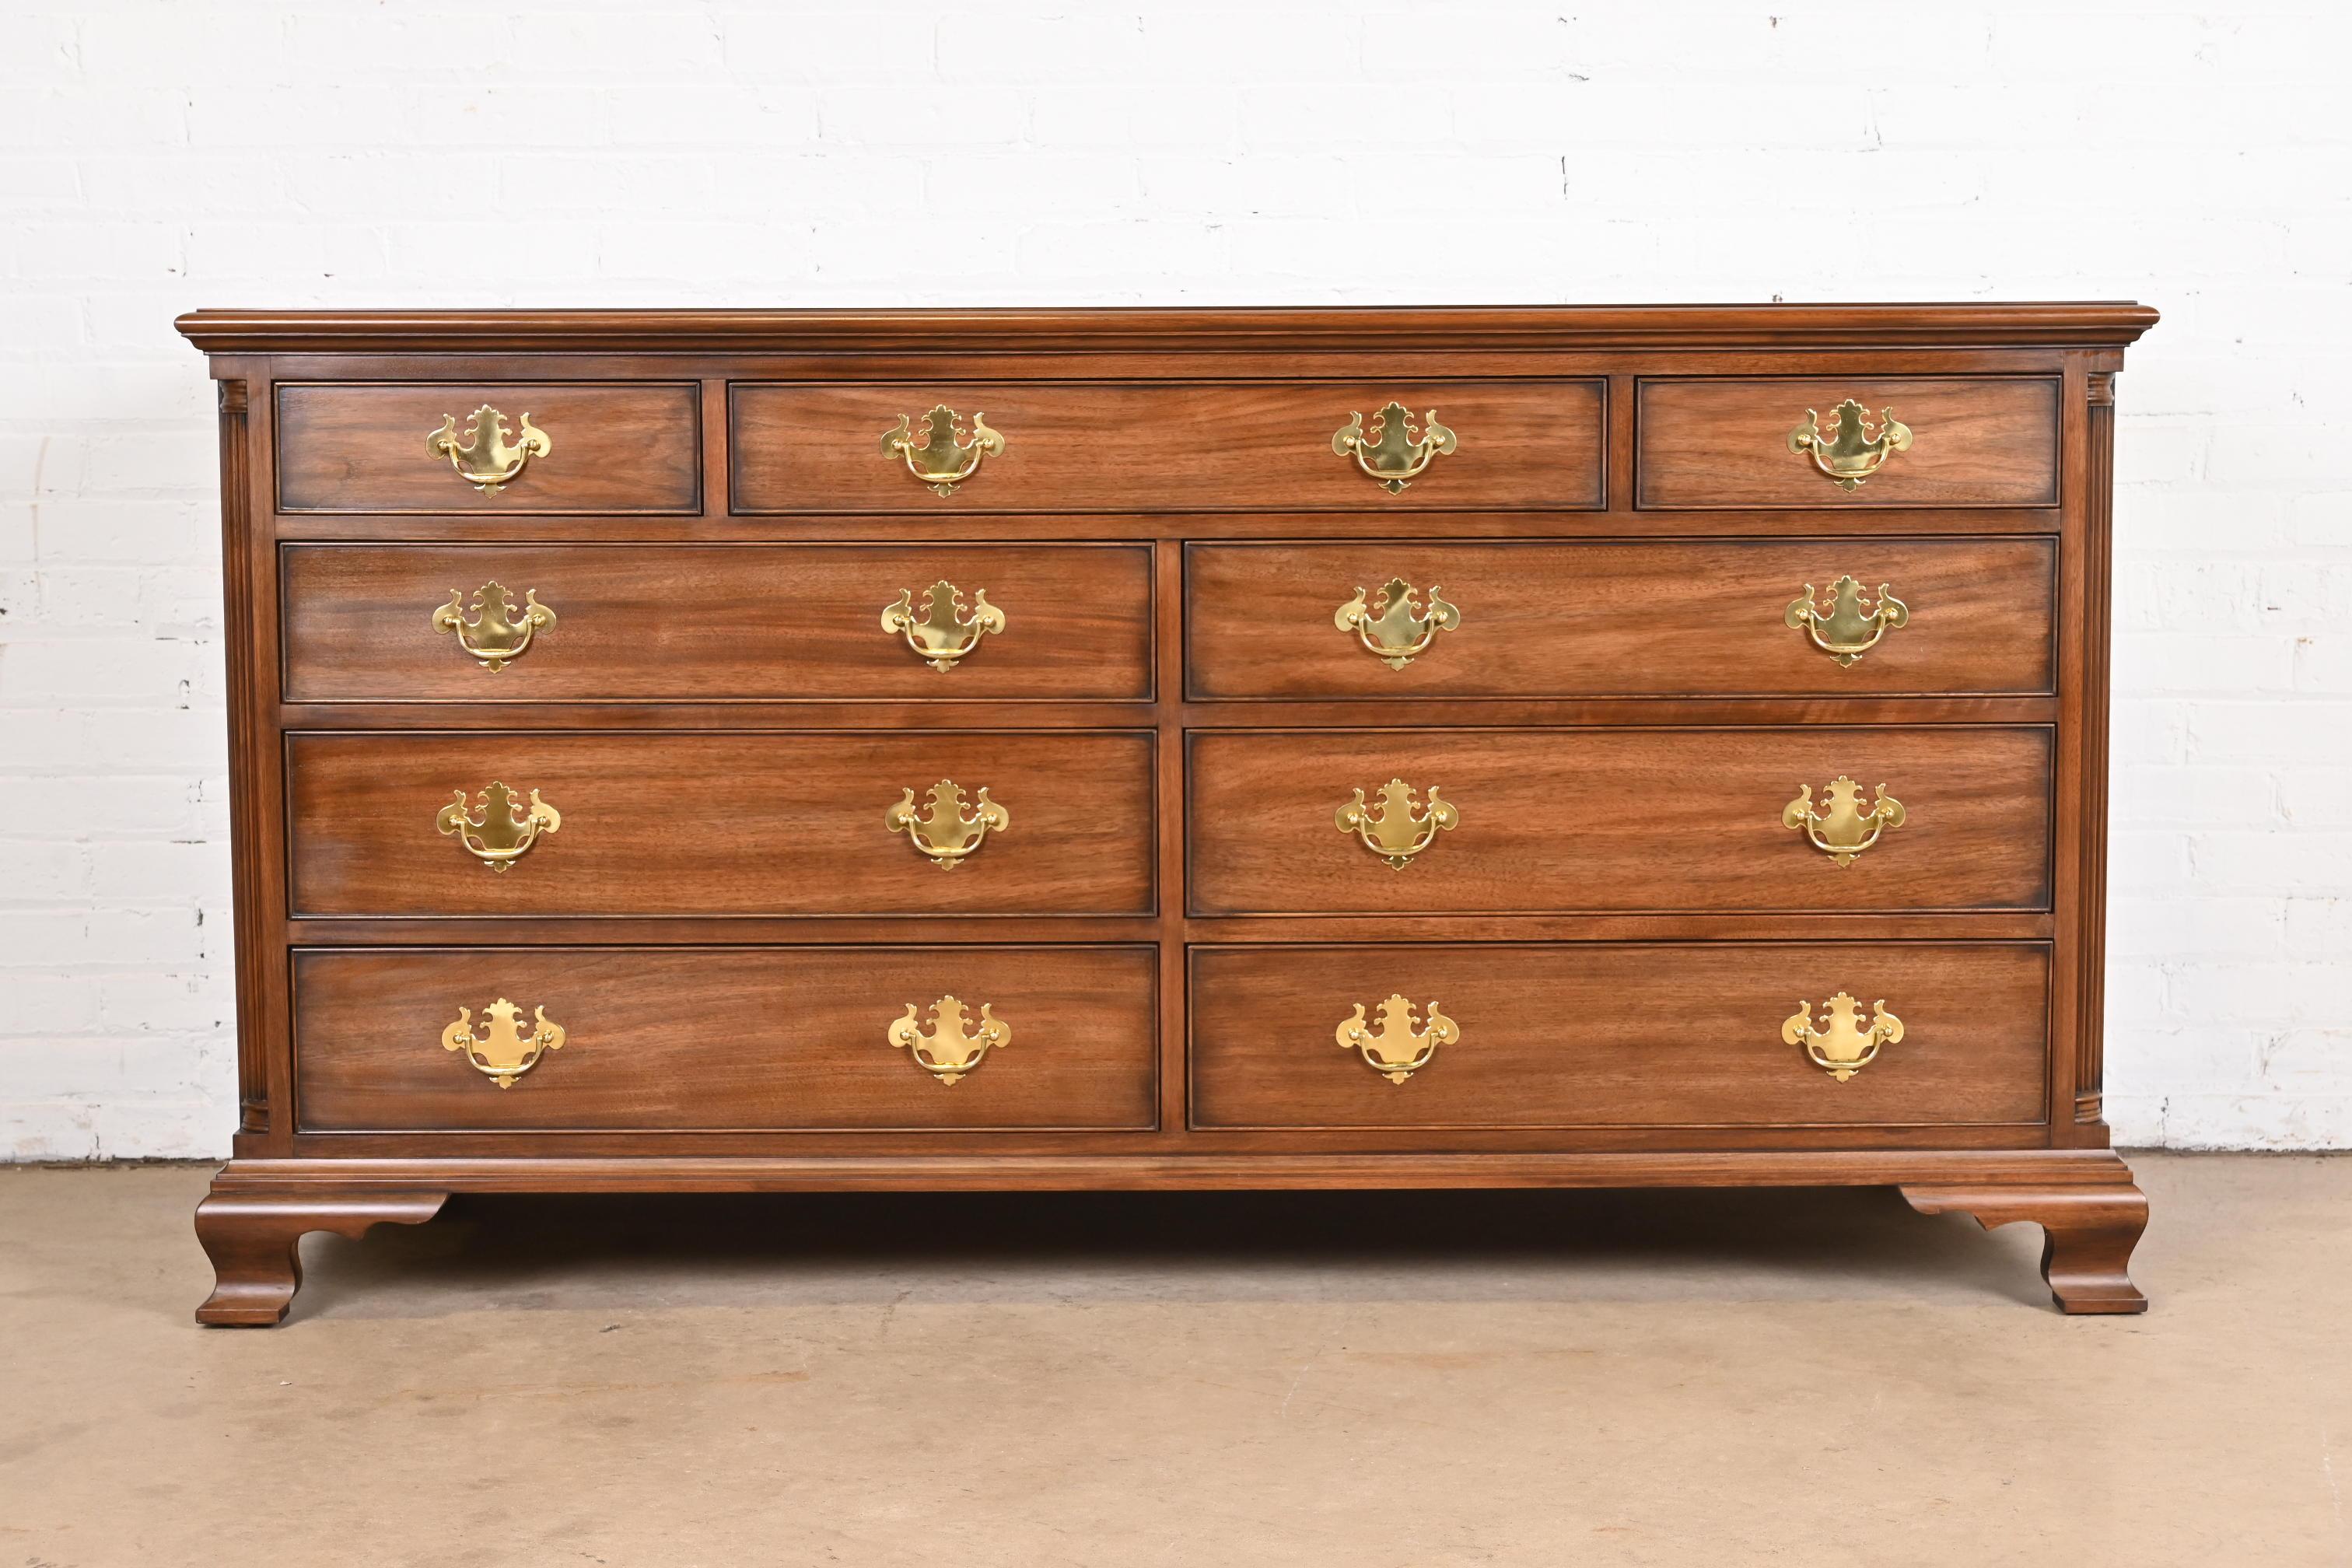 An exceptional Georgian or Chippendale style nine-drawer dresser or credenza

By Henkel Harris

USA, 1990

Solid black walnut, with original brass hardware.

Measures: 66.25